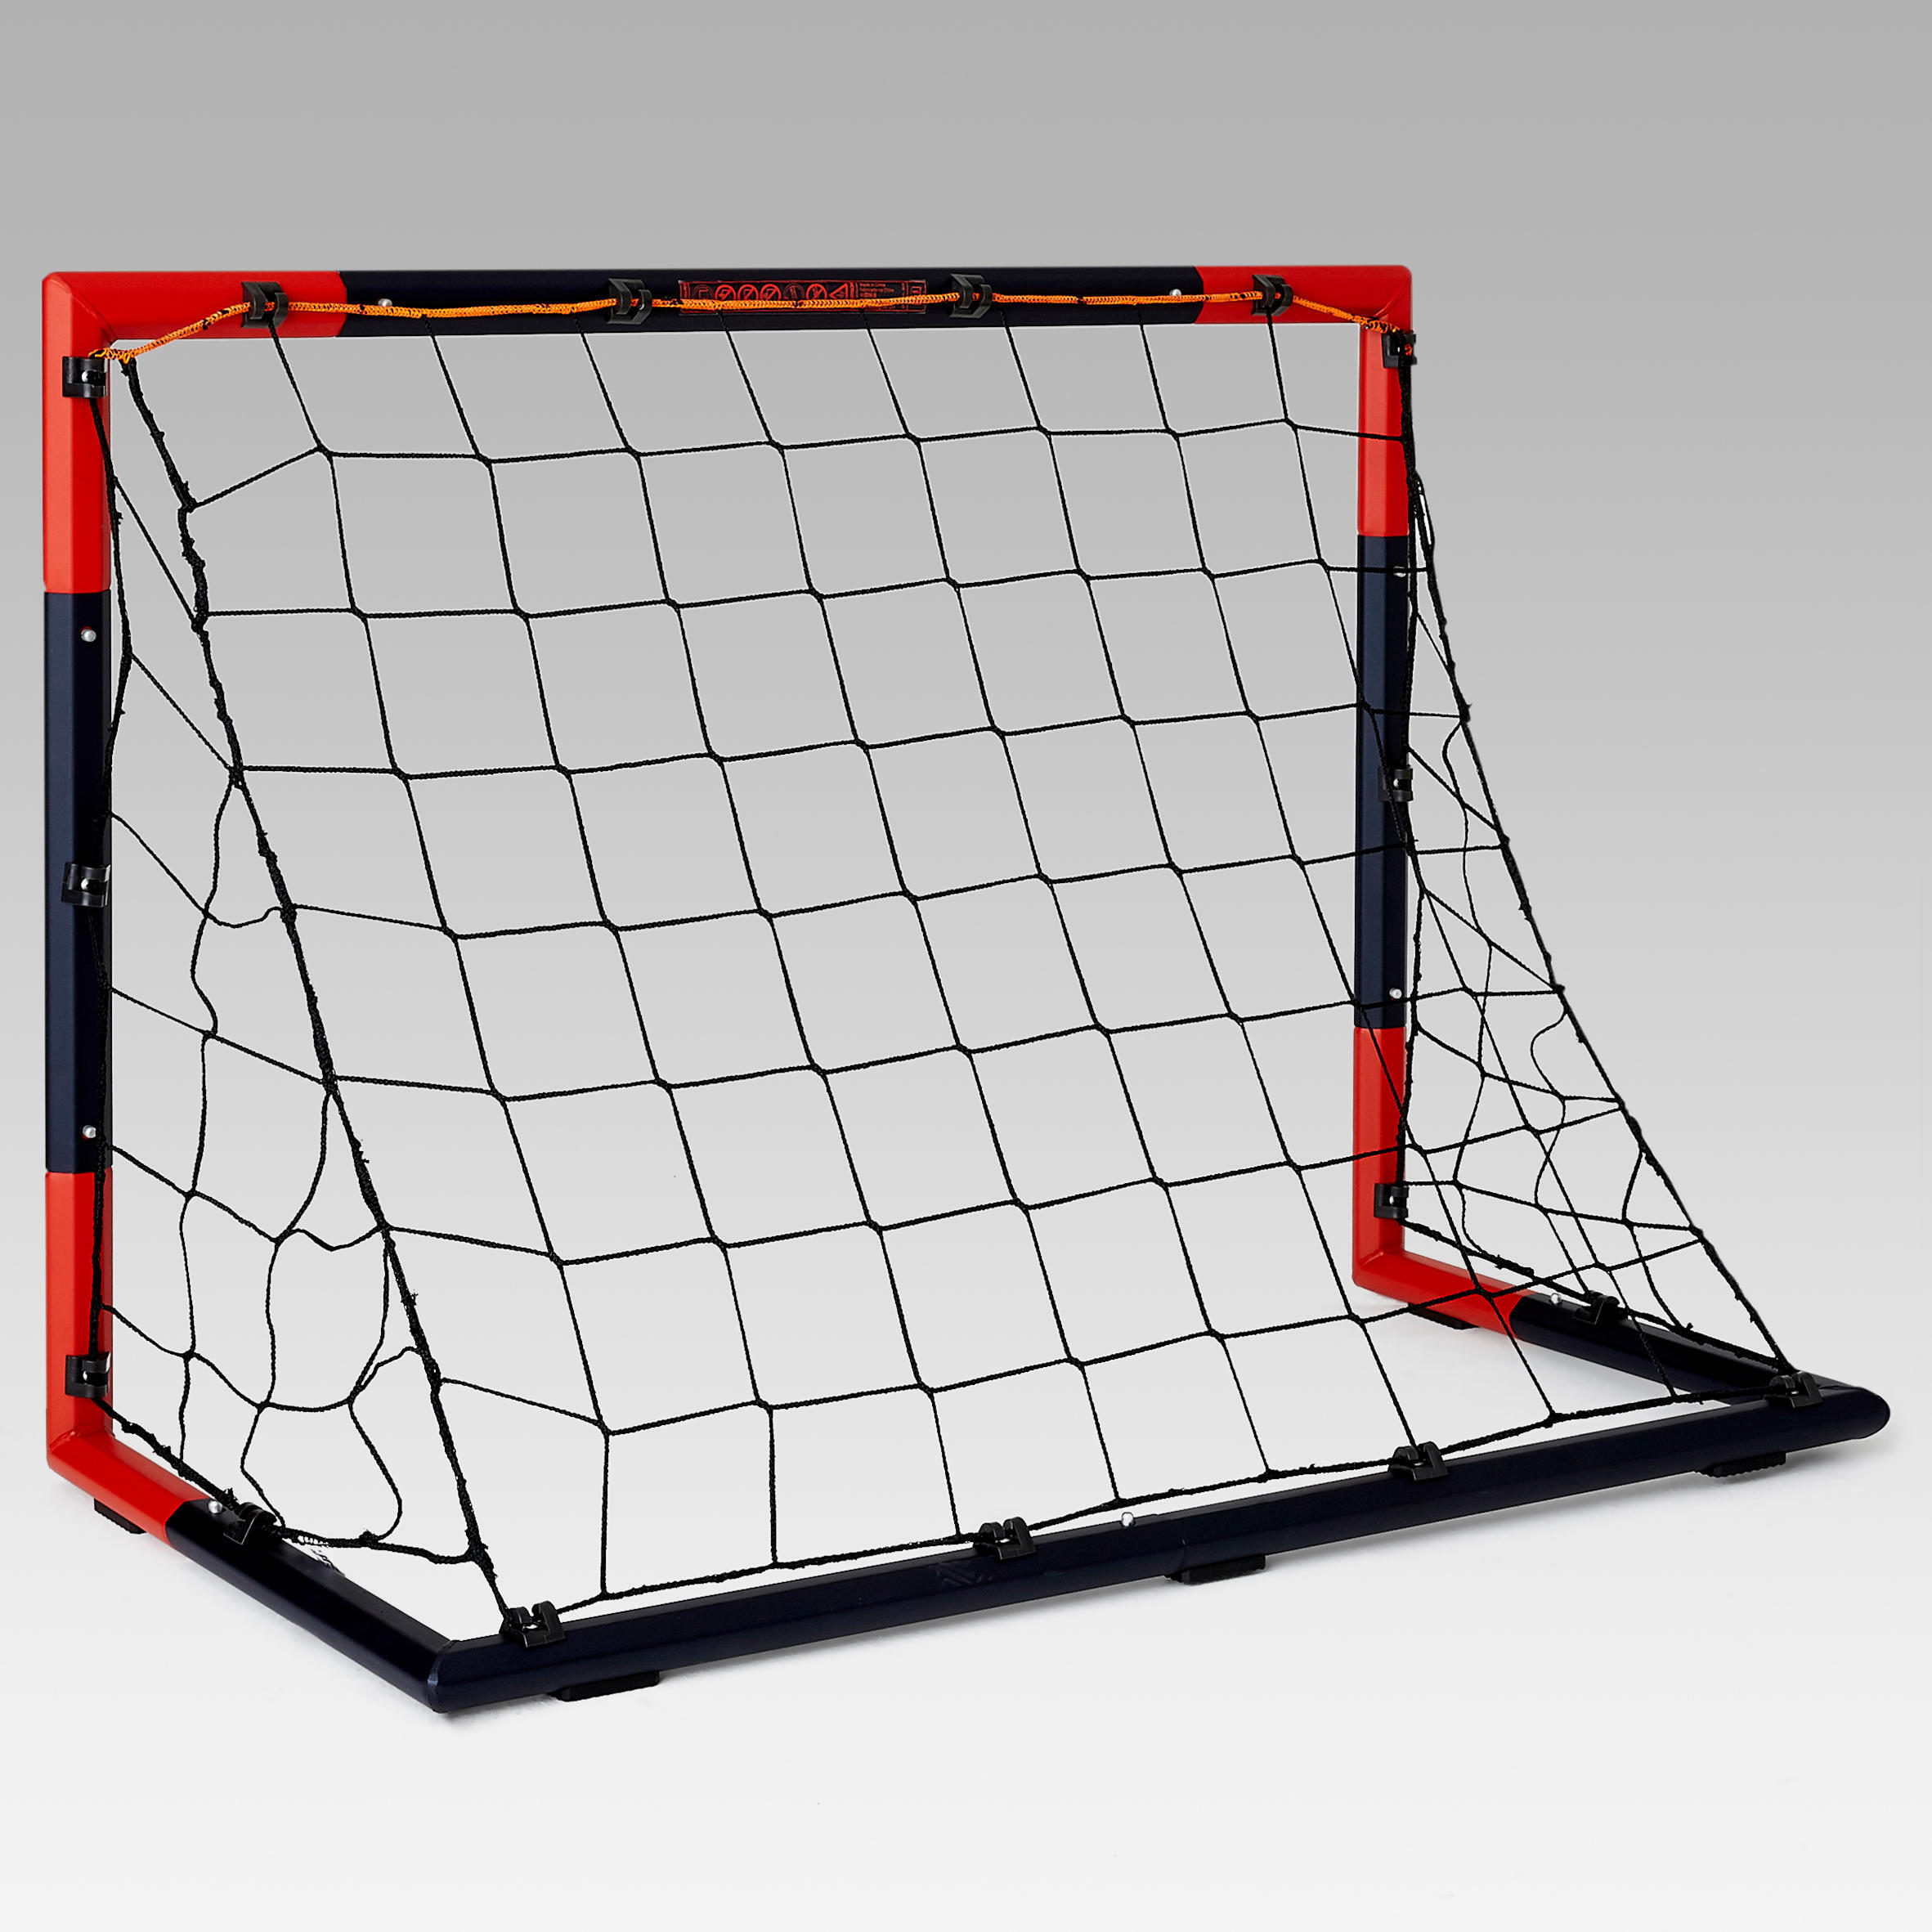 SG 500 Size 5 Football Goal - Navy/Vermilion Red 7/13